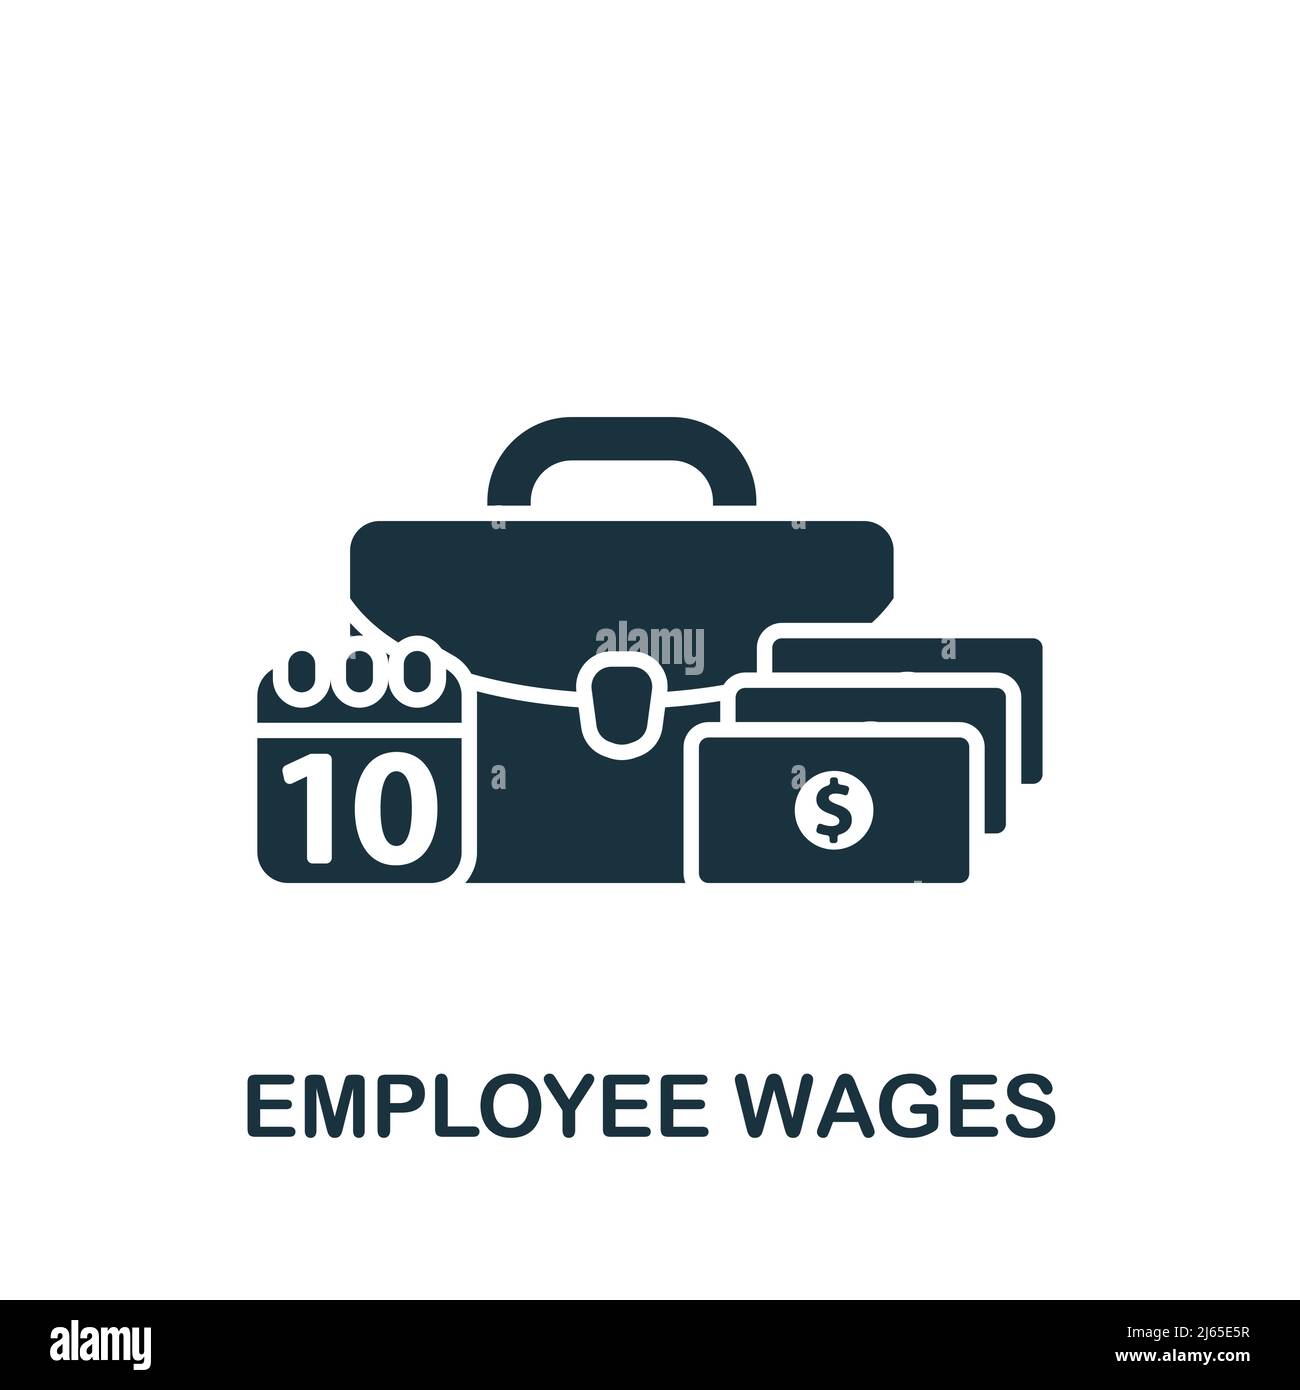 Employee Wages icon. Monochrome simple Business Training icon for templates, web design and infographics Stock Vector